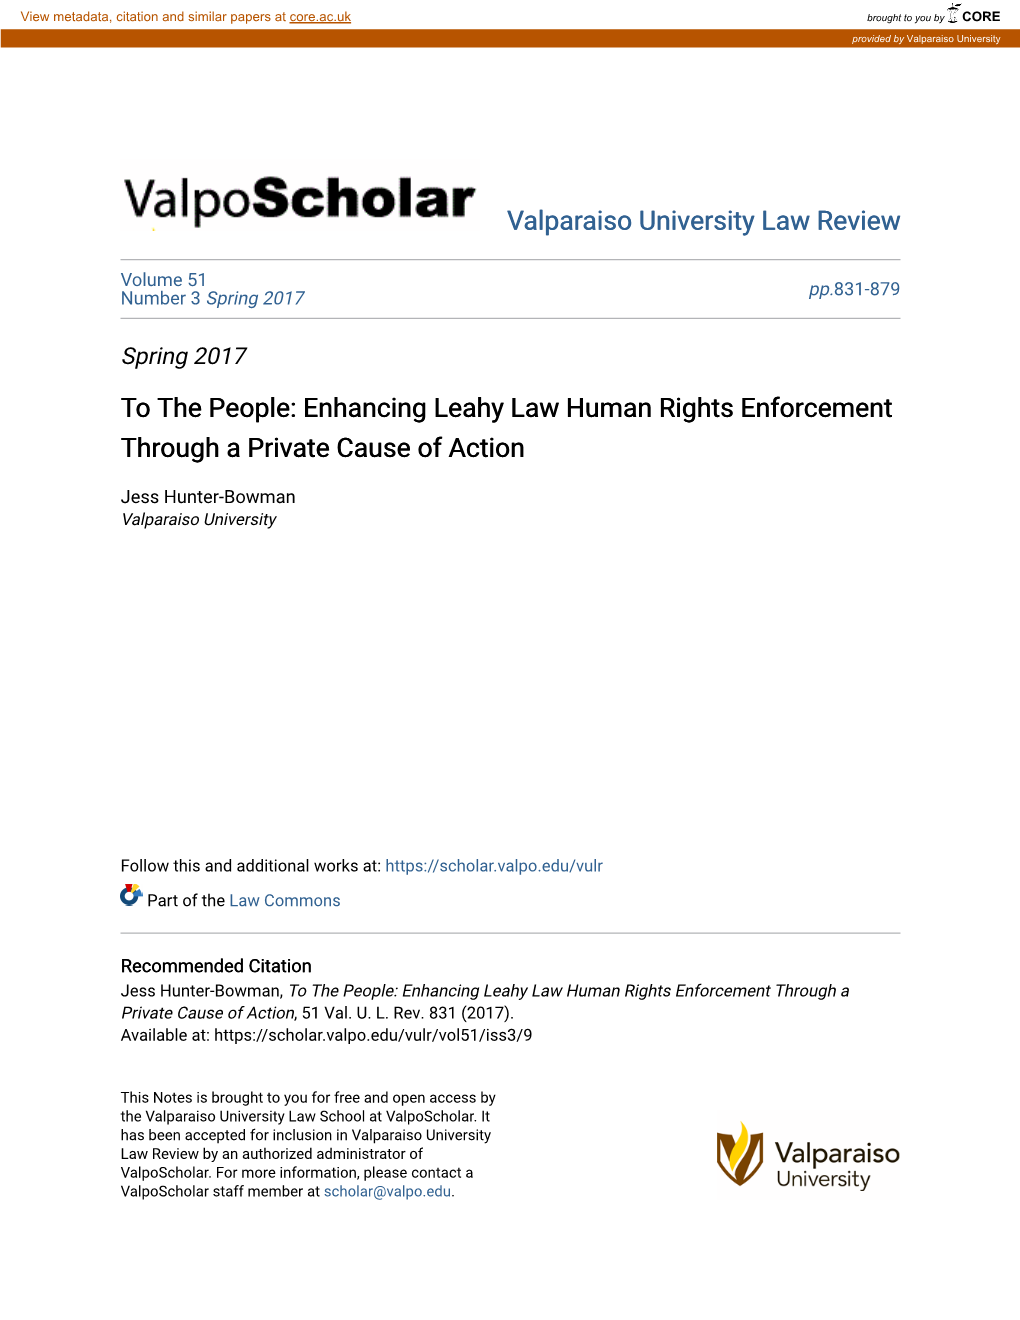 Enhancing Leahy Law Human Rights Enforcement Through a Private Cause of Action